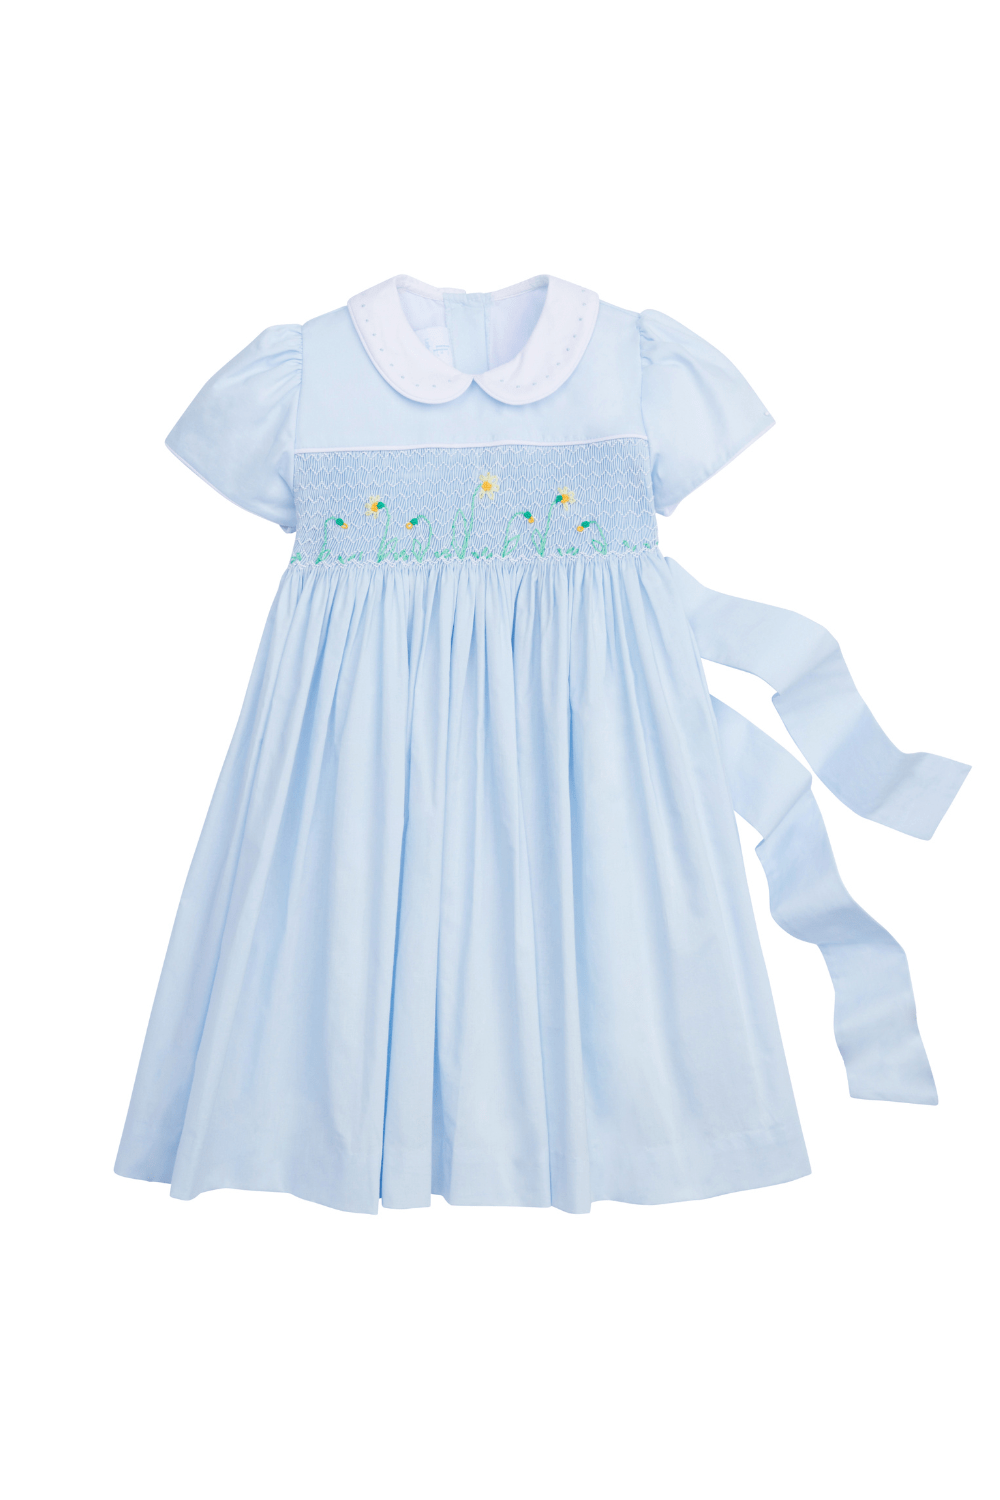 classic childrens clothing girls light blue dress with peter pan collar, daffodil smocking detail, and bow sash